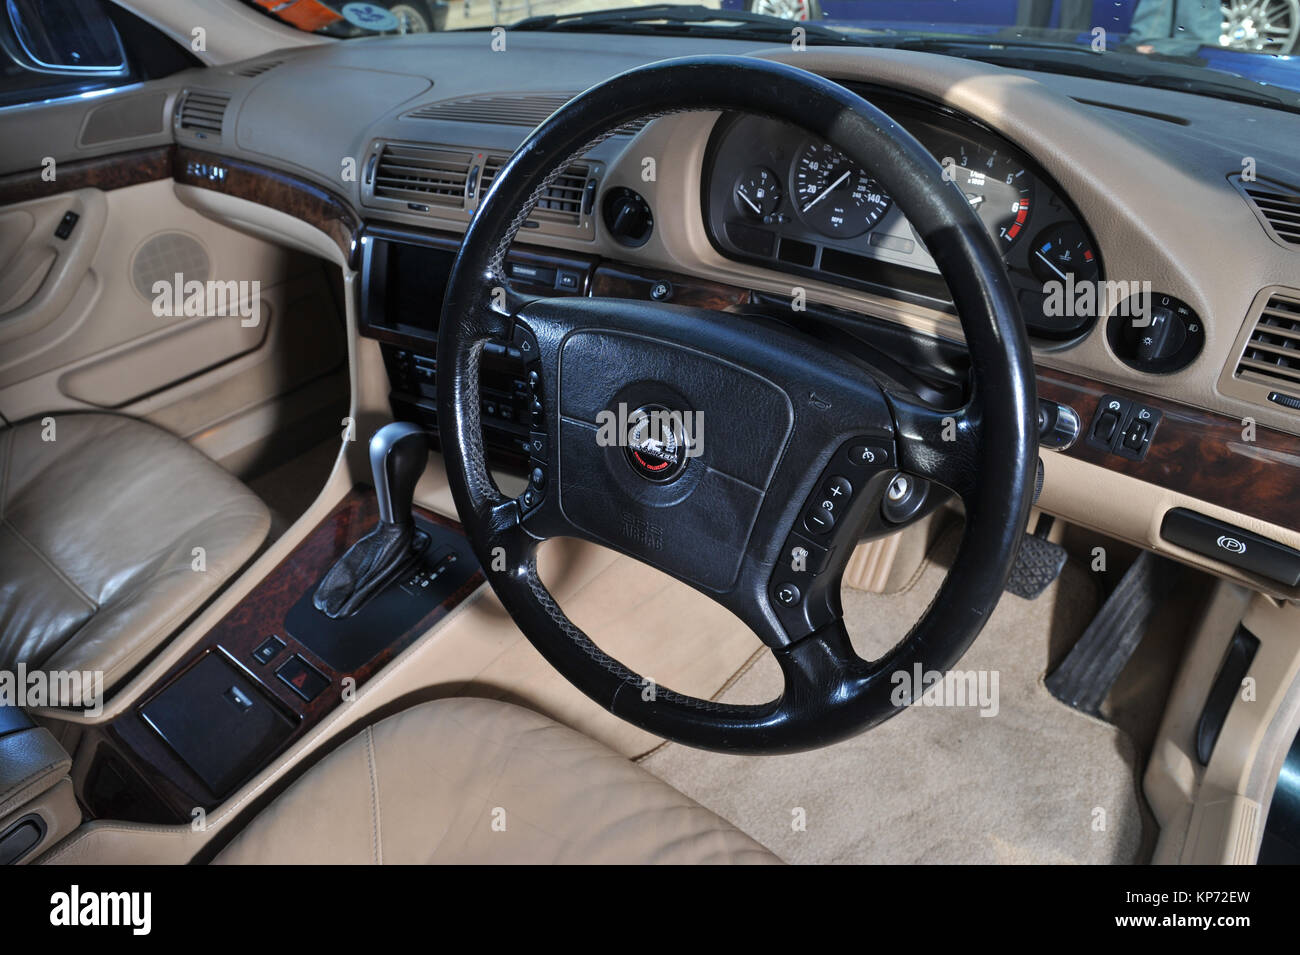 AC Schnitzer steering wheel in a 1990s BMW 7 Series car Stock Photo - Alamy